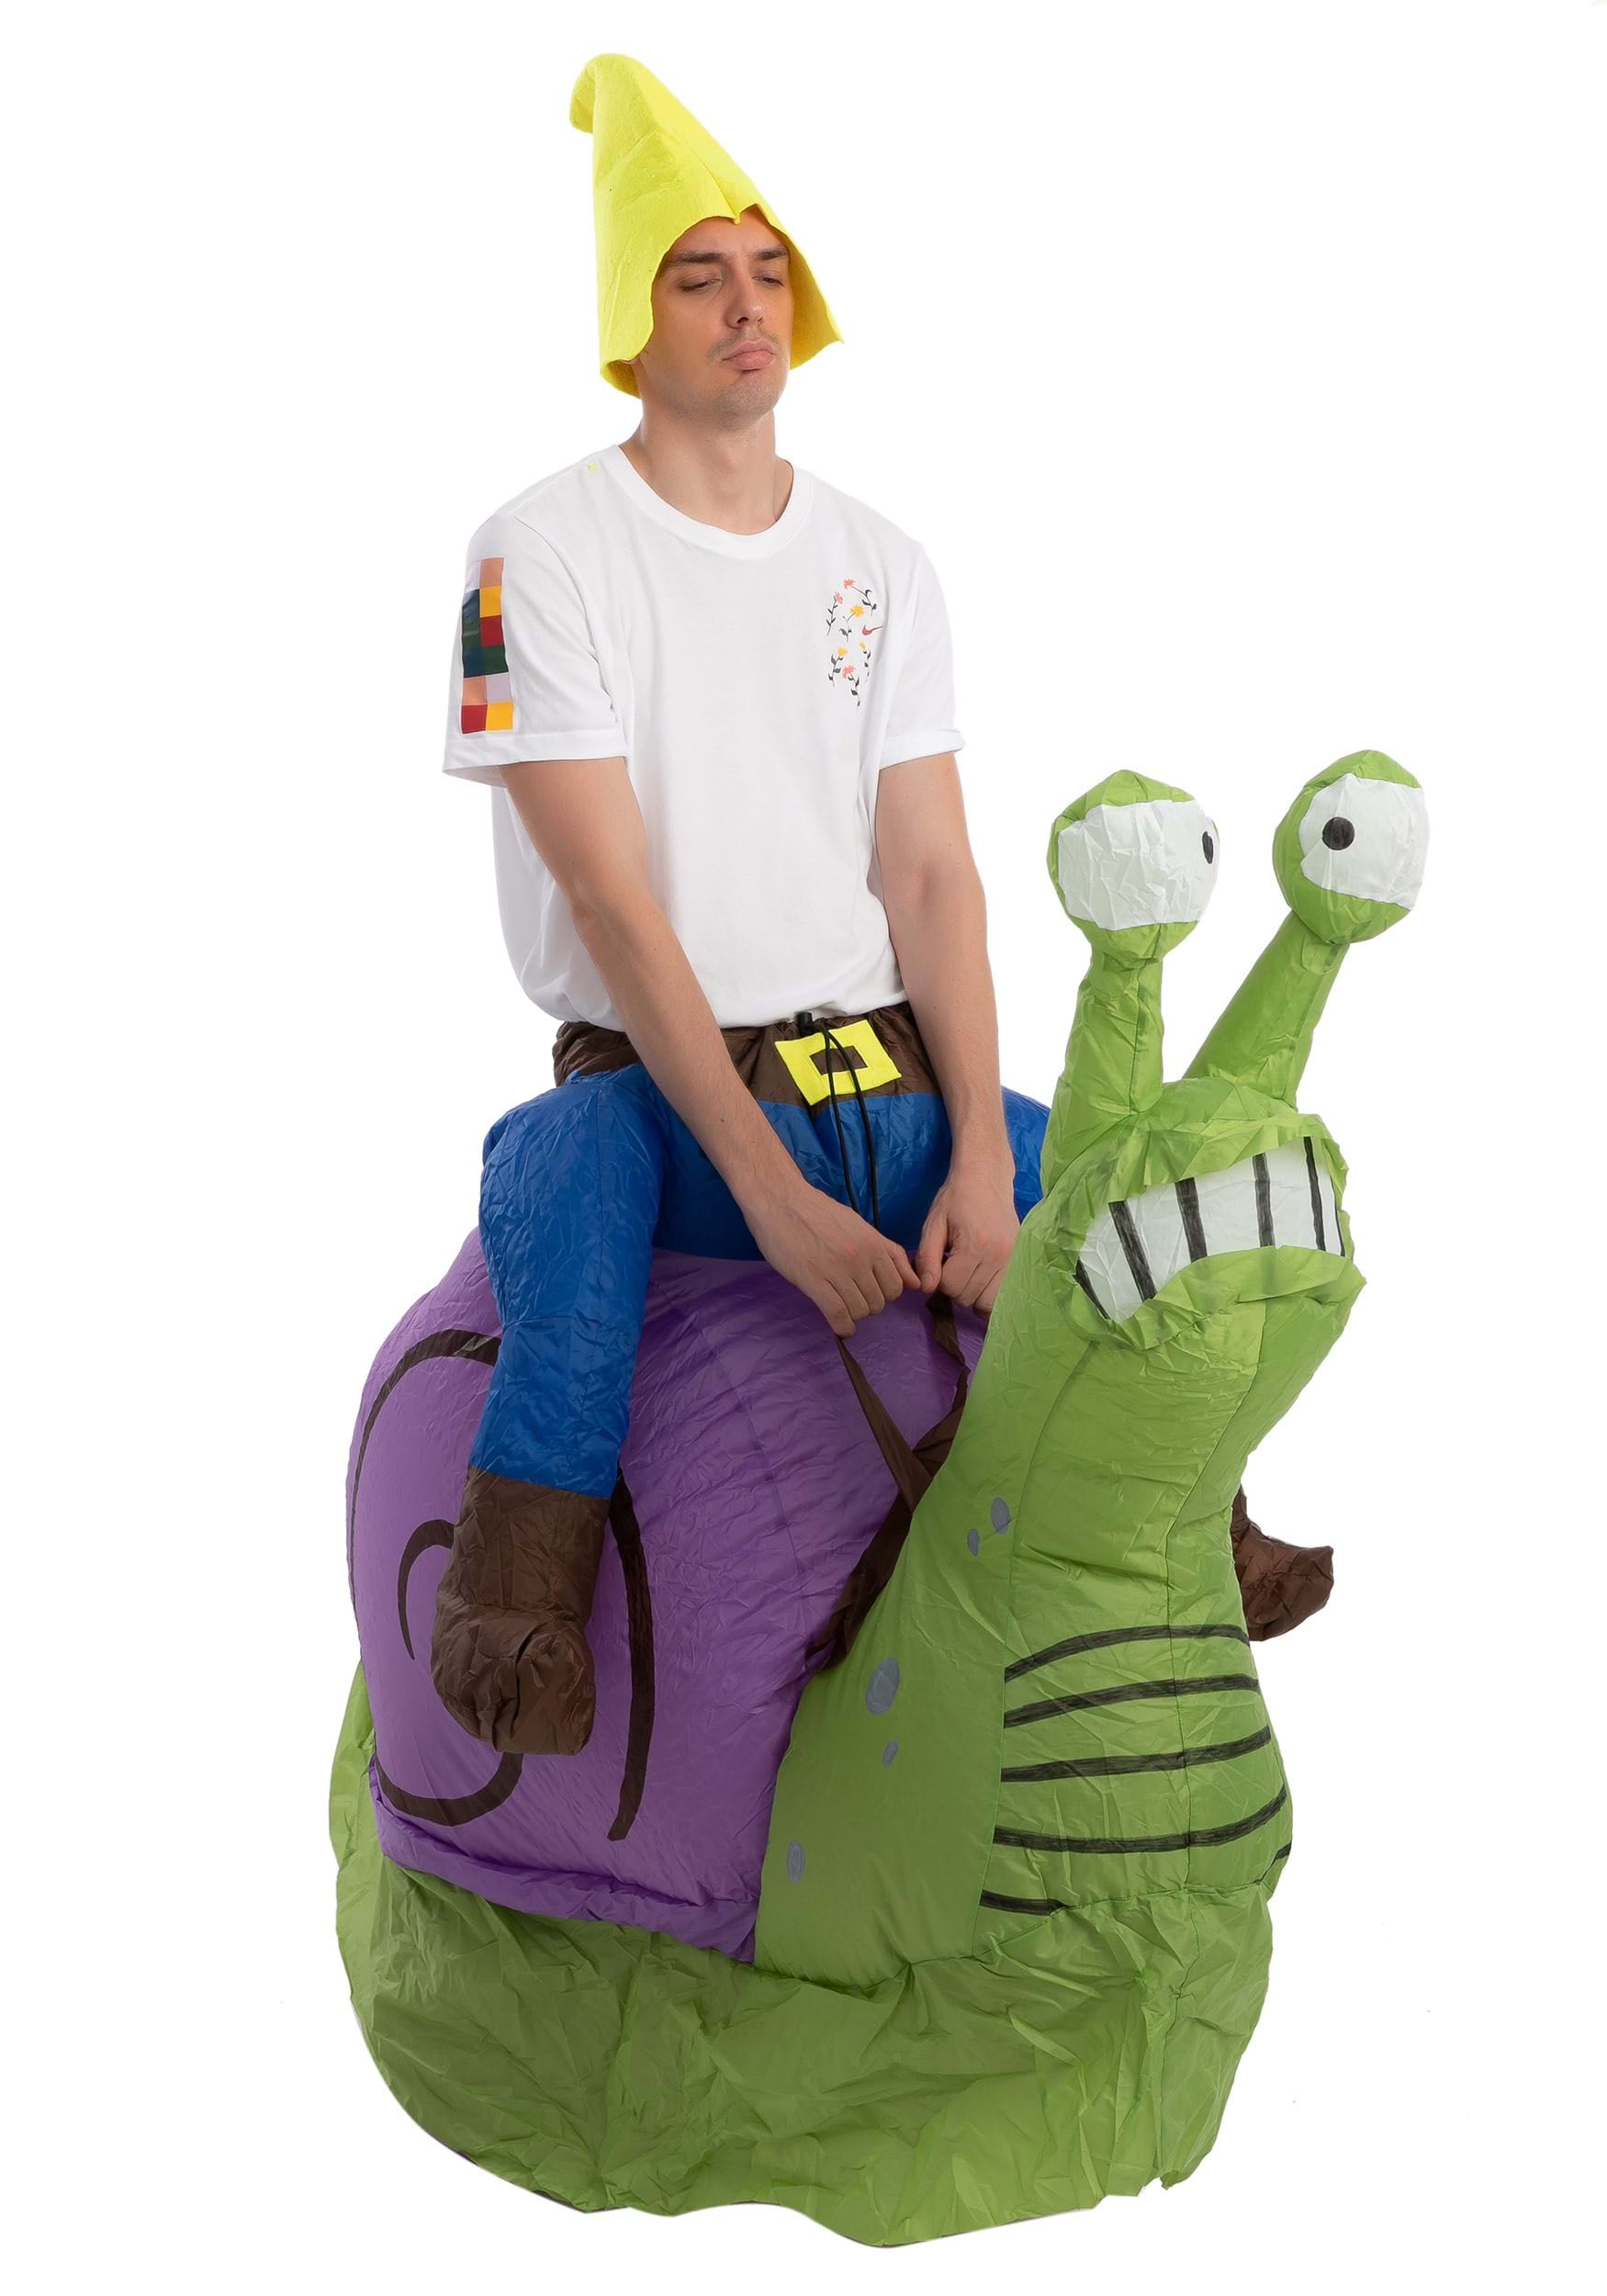 Adult Inflatable Grumpy Snail Ride-On Costume